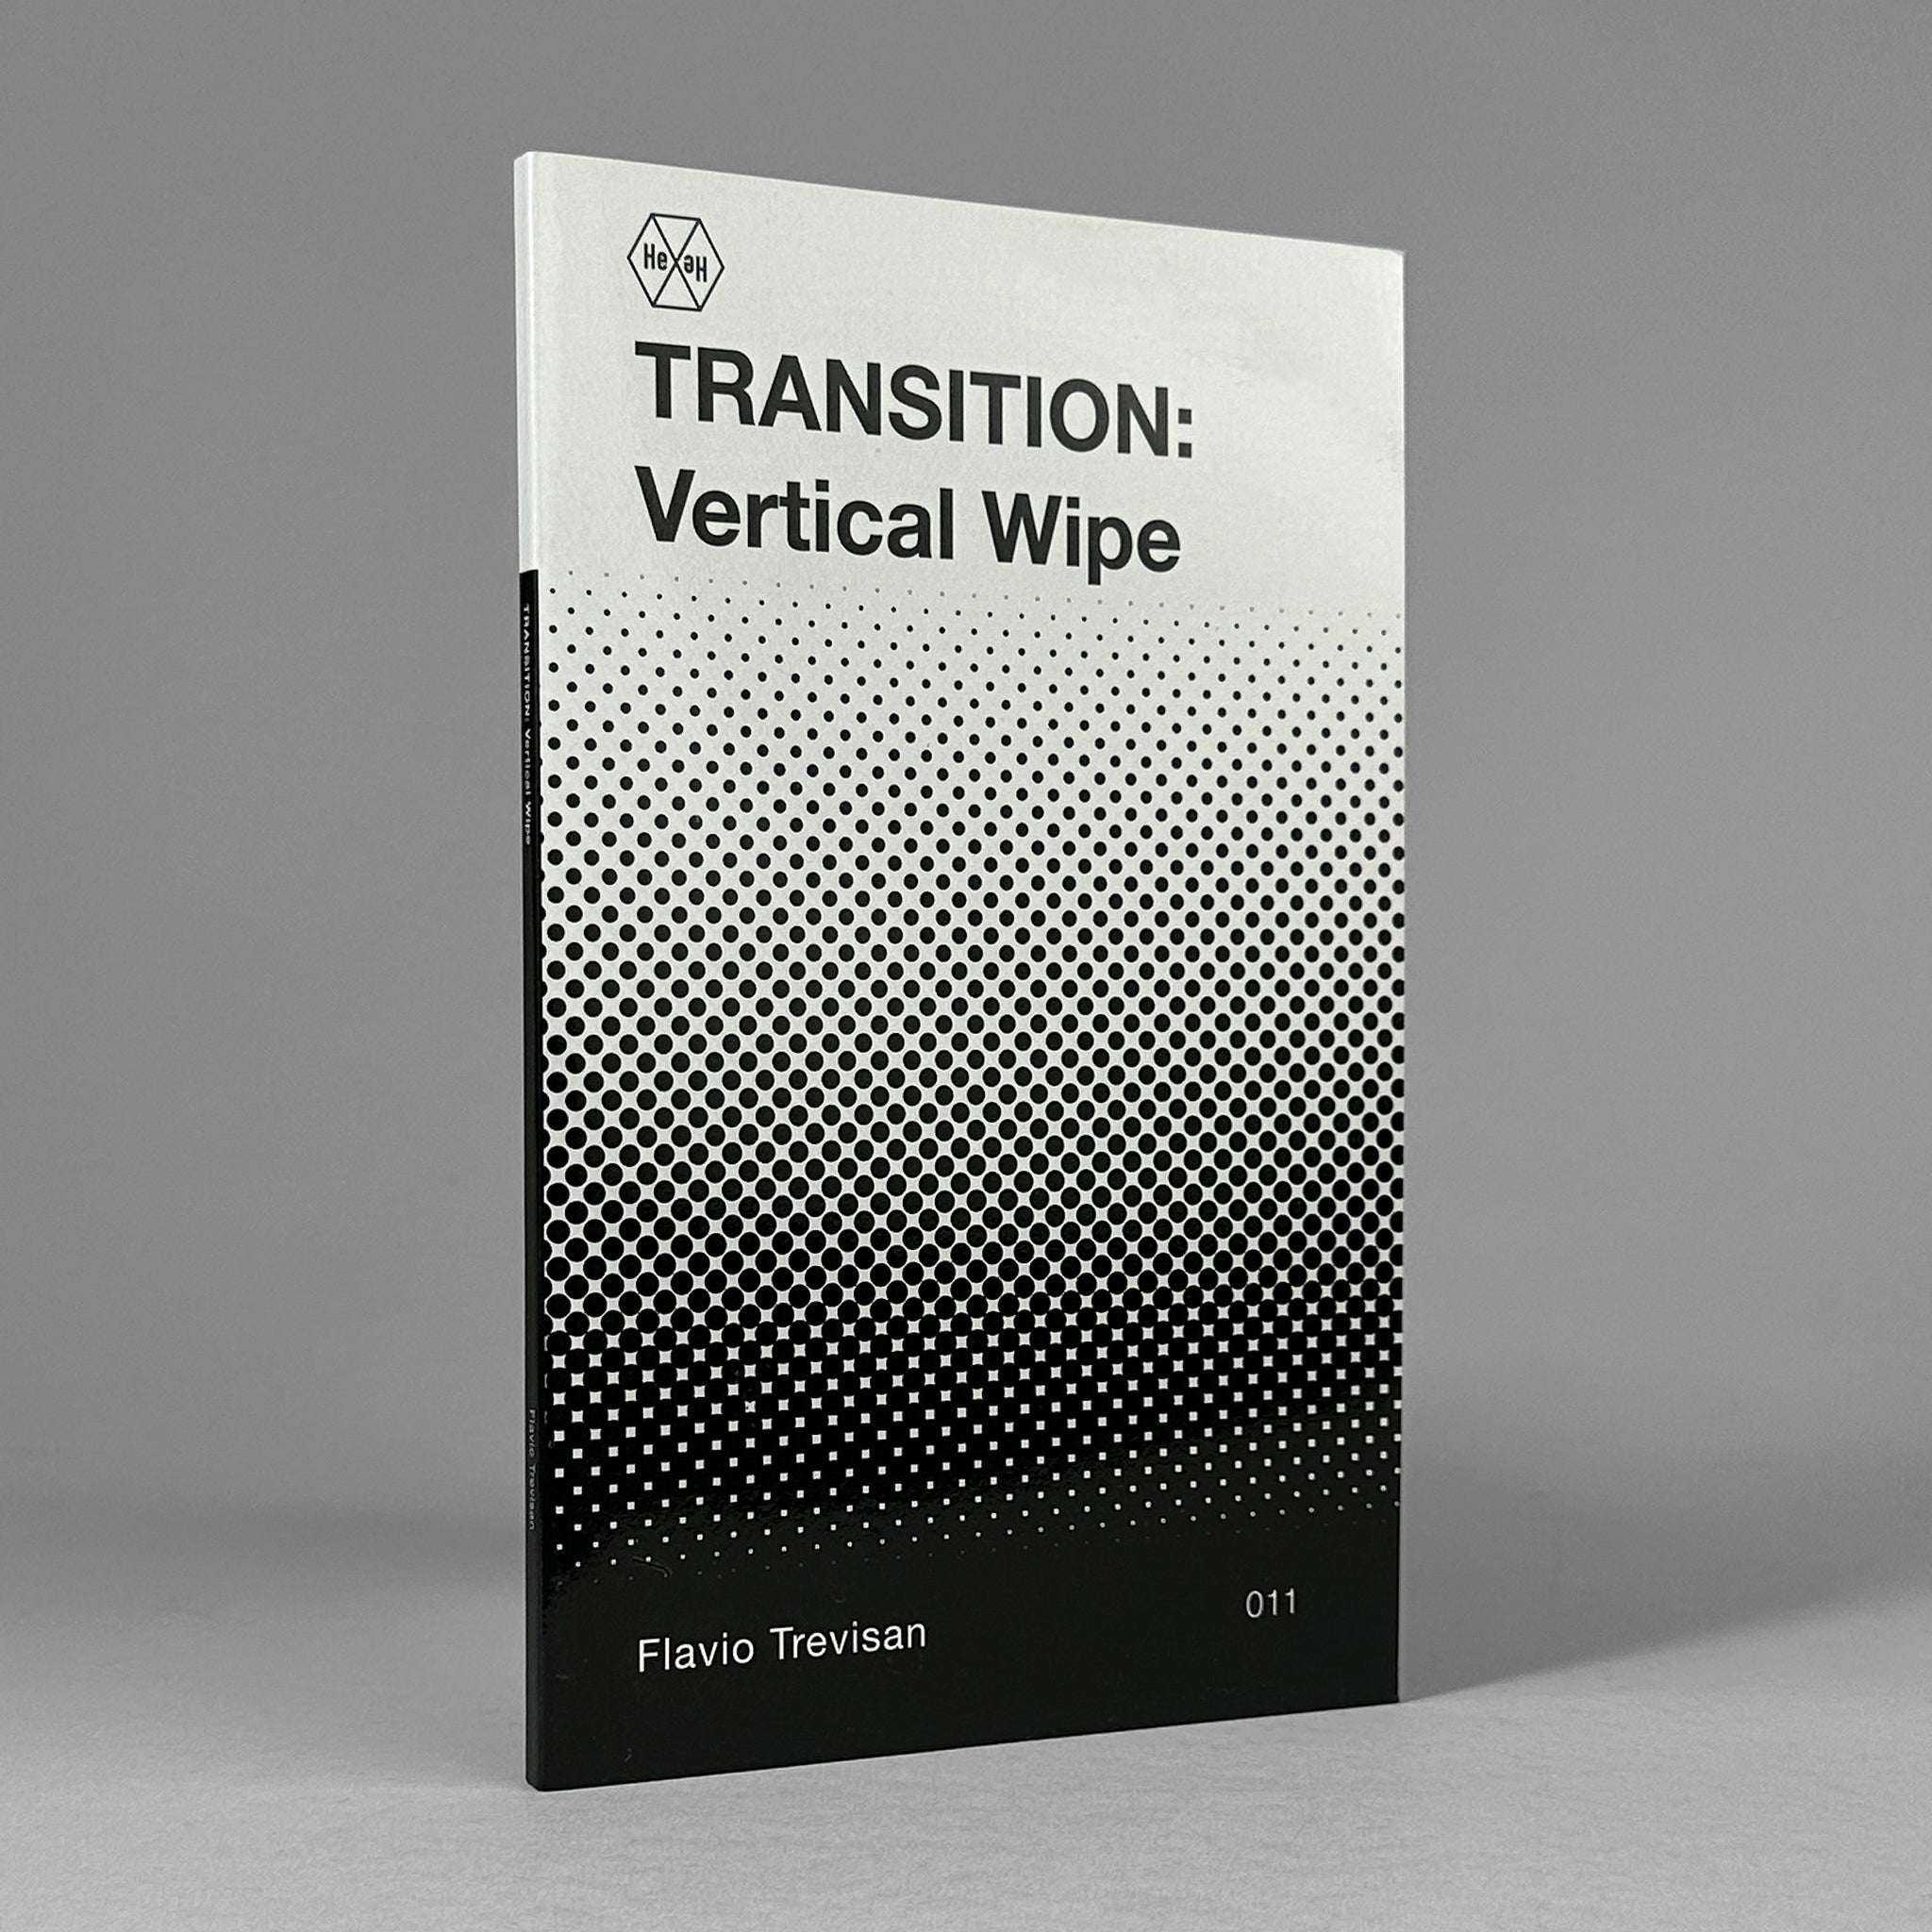 TRANSITION: Vertical Wipe